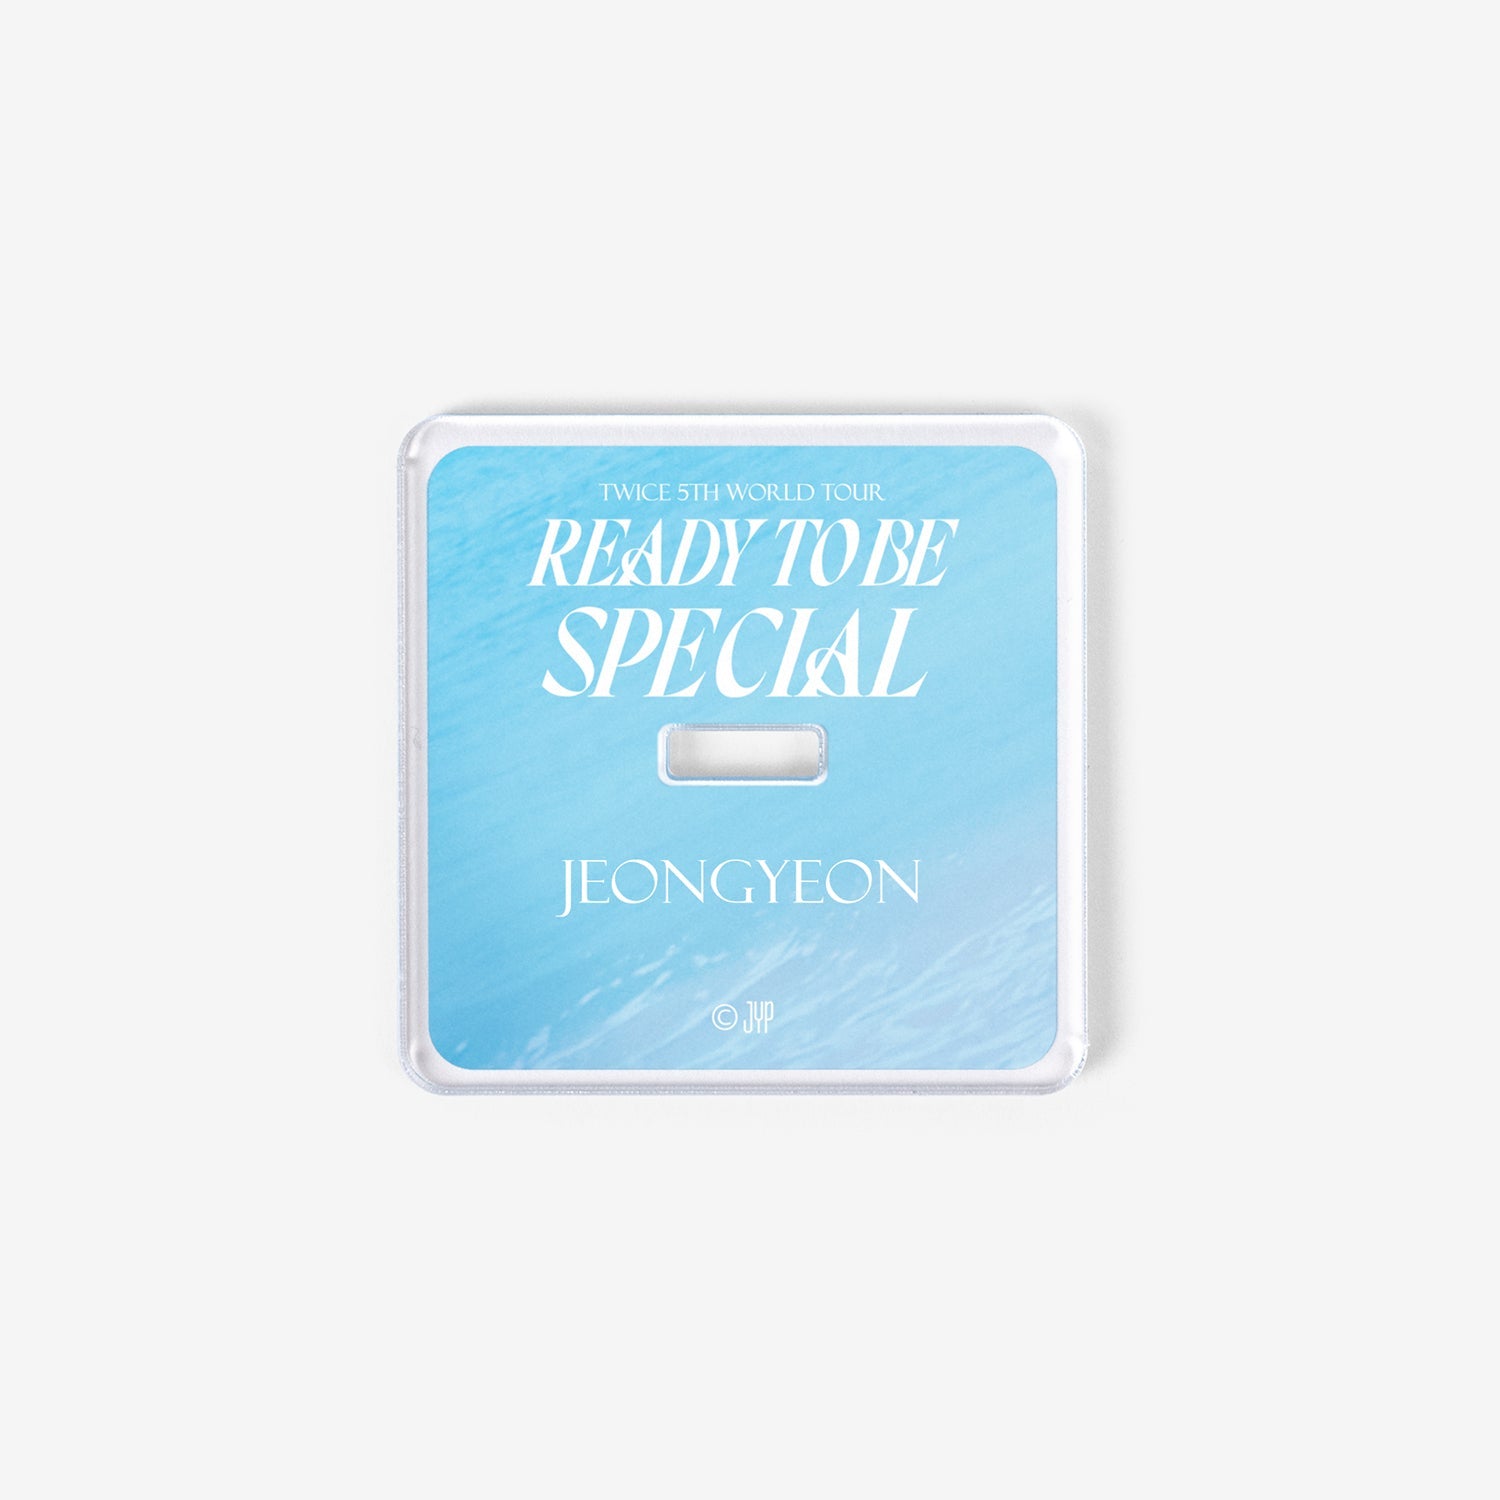 ACRYLIC STAND - JEONGYEON【SPECIAL】/ TWICE『READY TO BE SPECIAL』